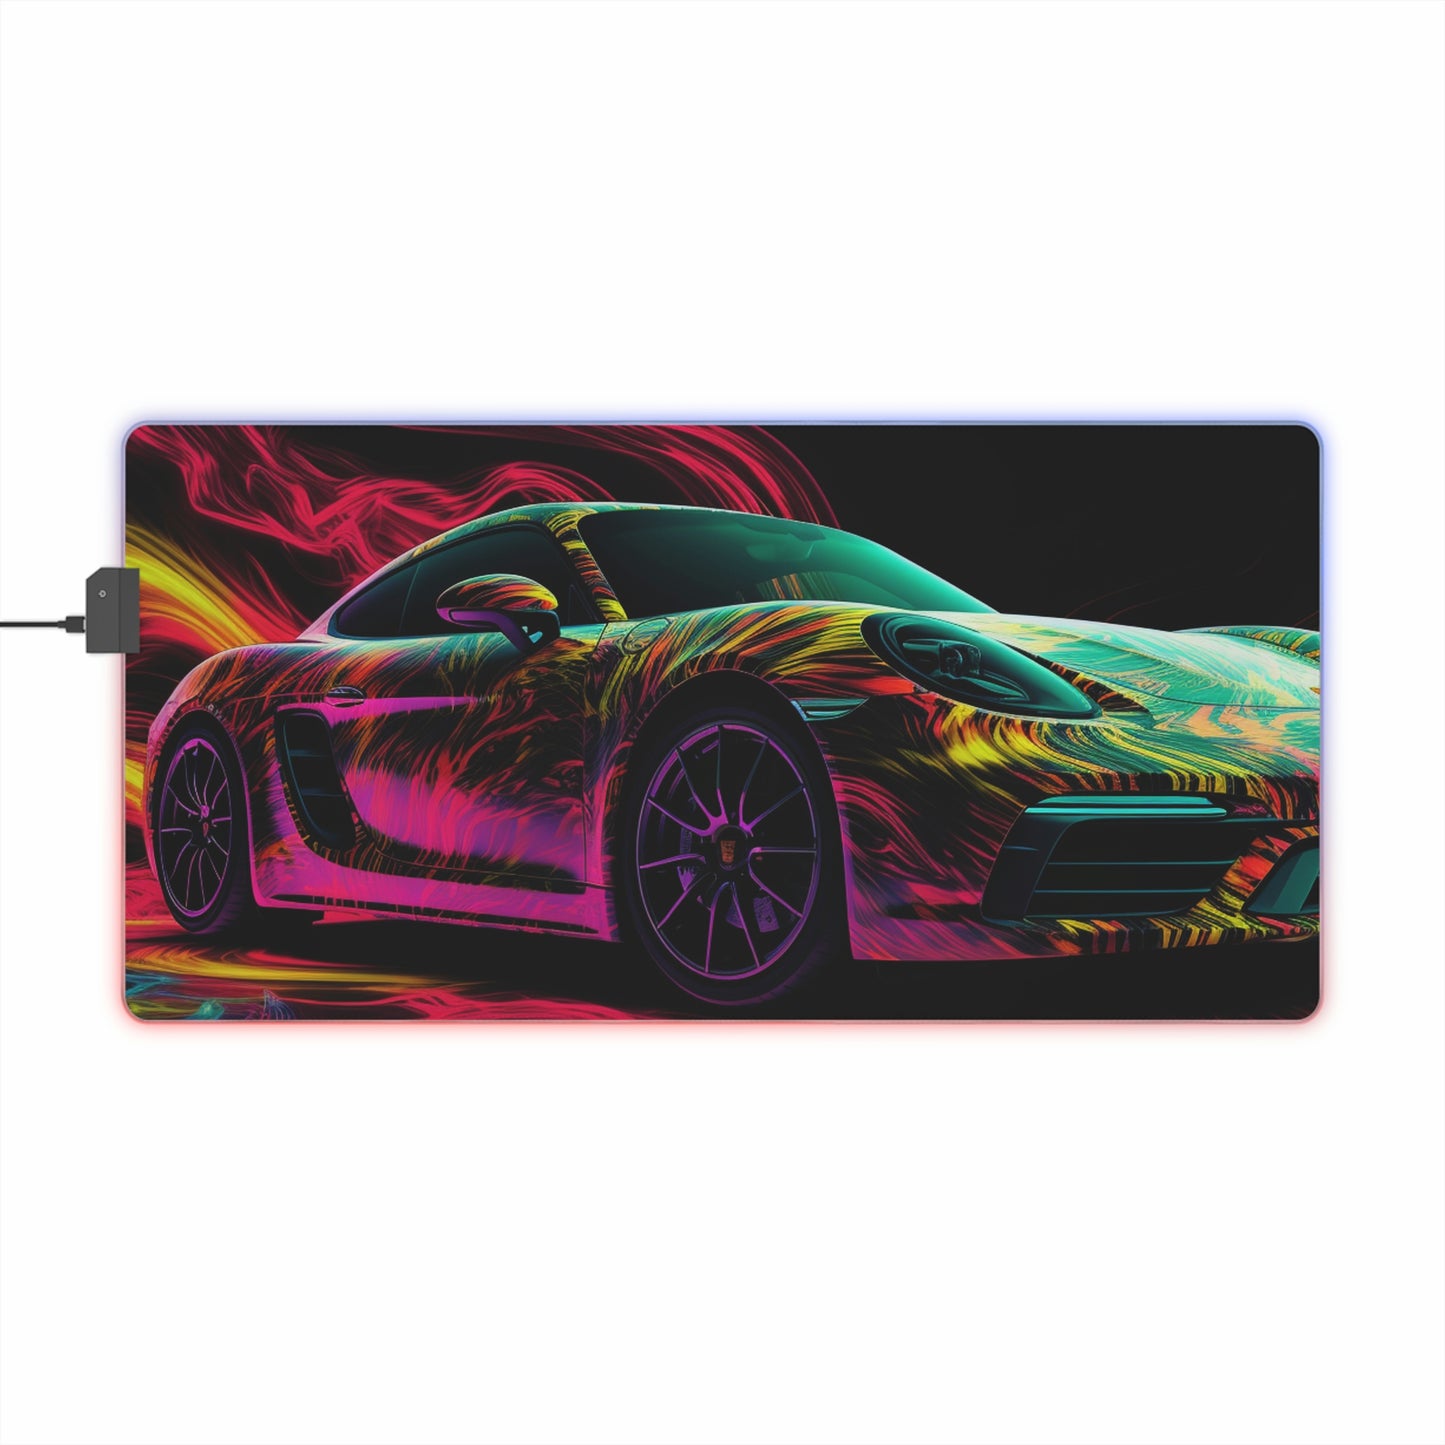 LED Gaming Mouse Pad Porsche Flair 1